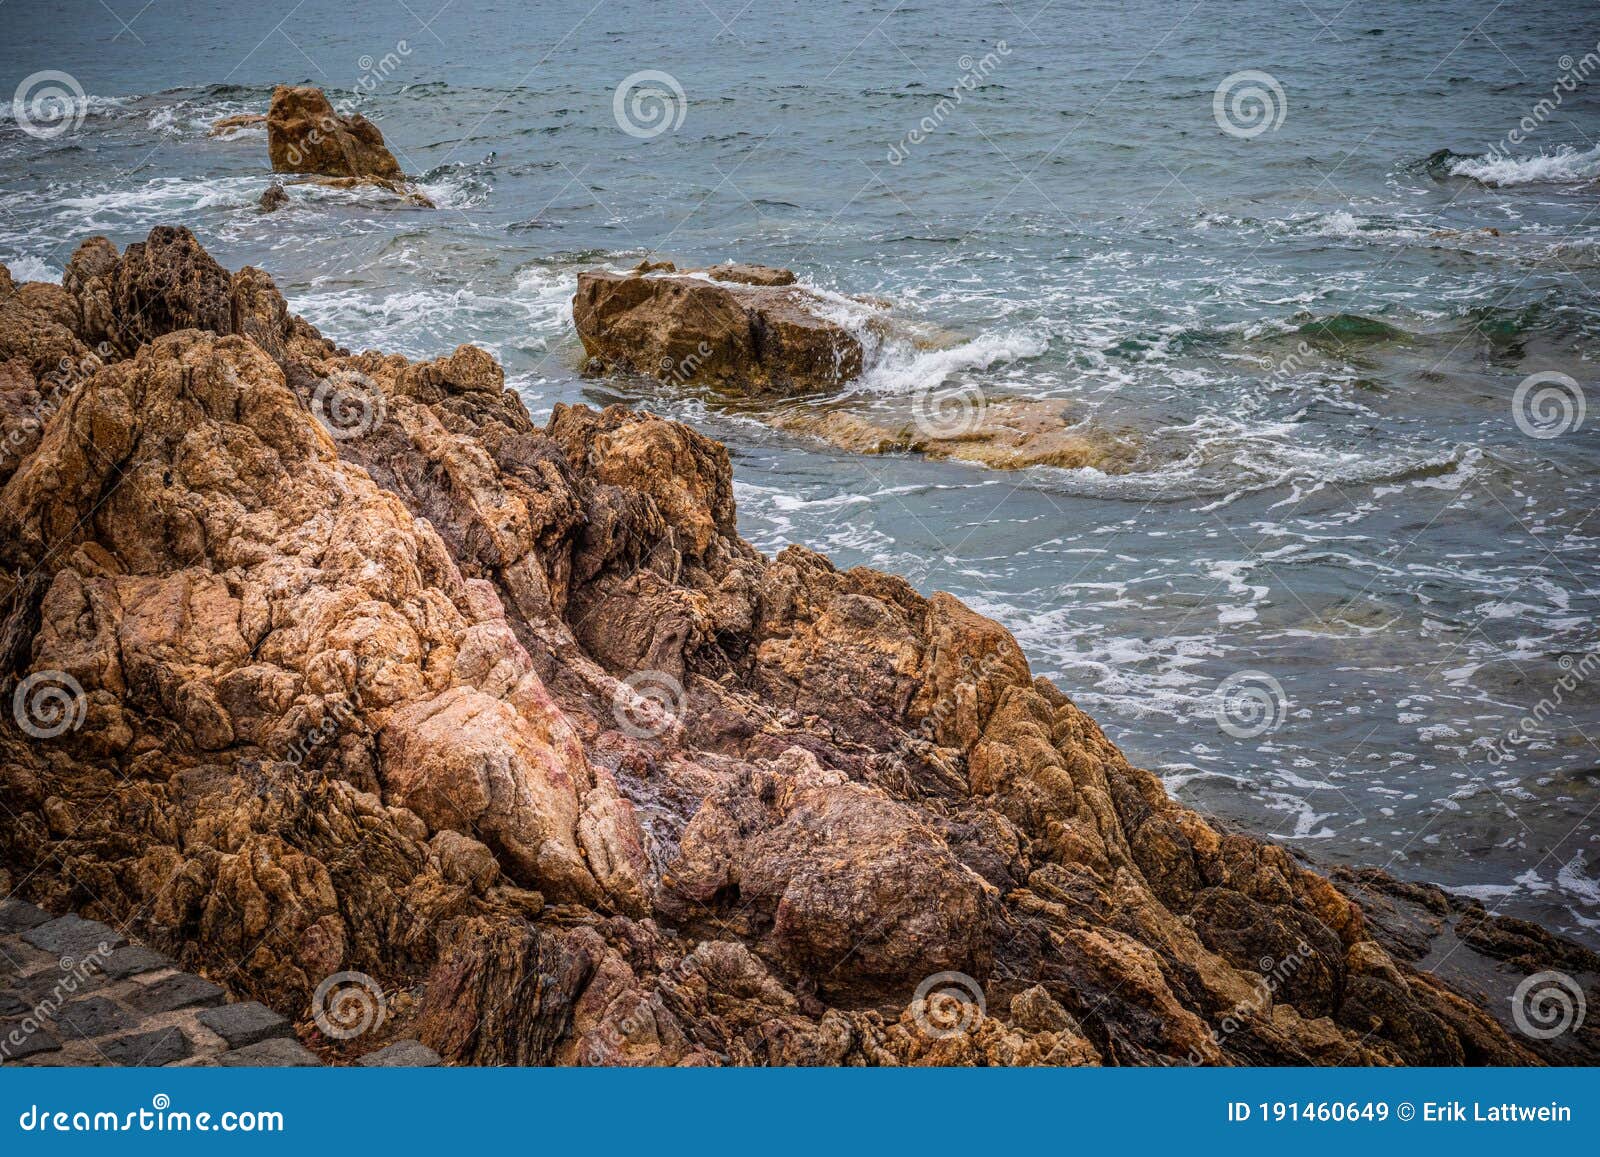 rocks in the water of the mediterranian sea